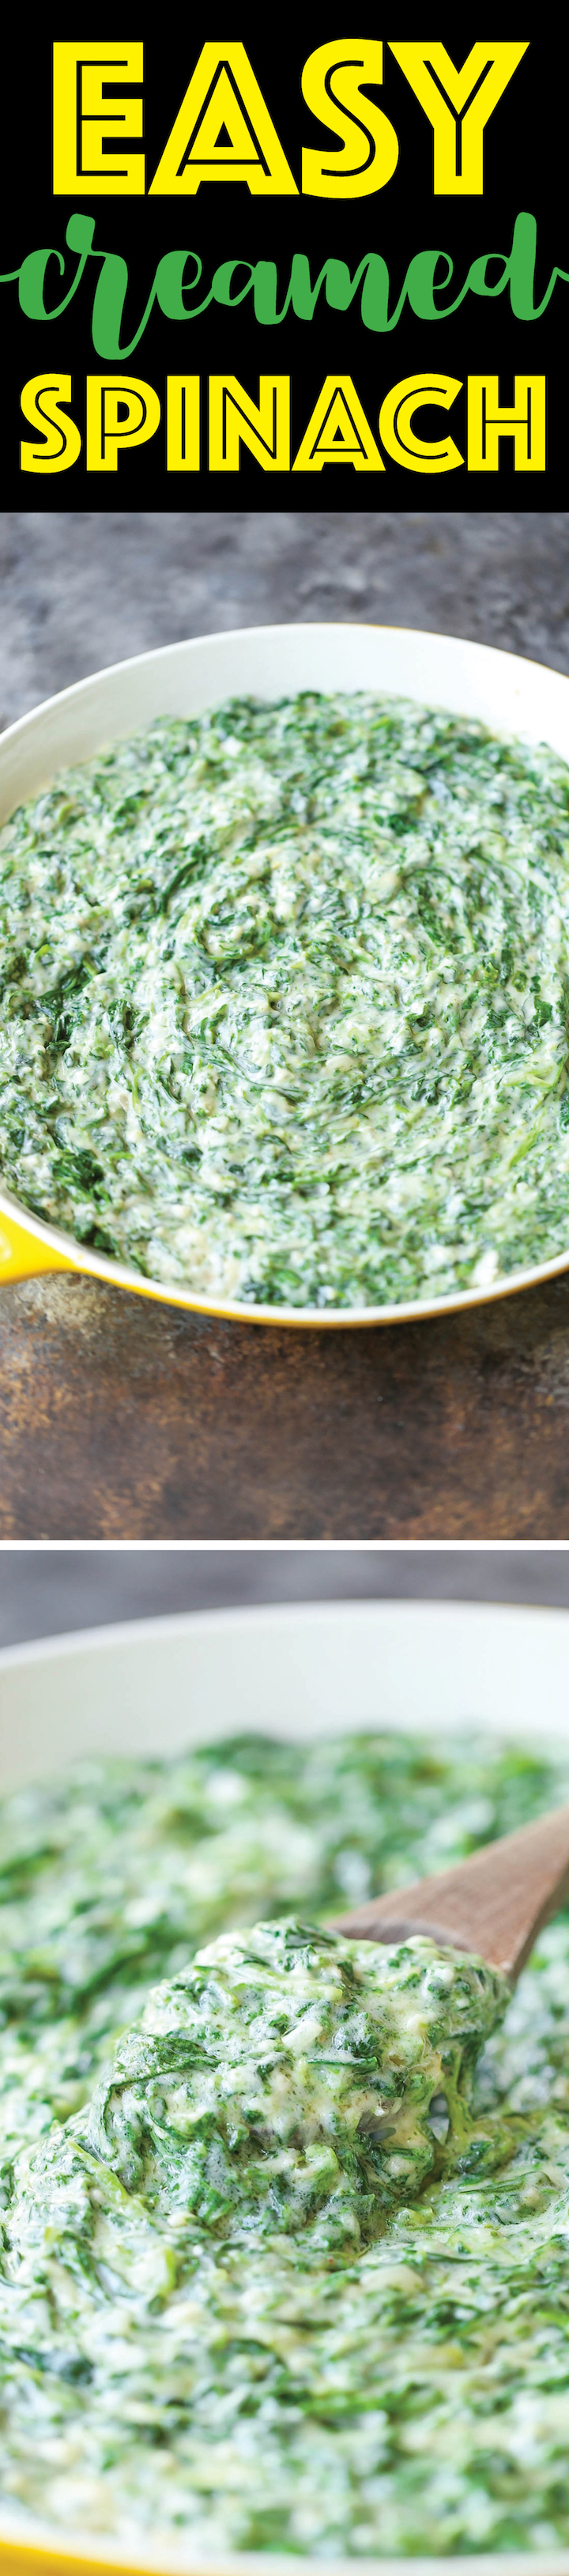 Easy Creamed Spinach - This will be the only creamed spinach recipe you will ever need. So creamy, cheesy and EASY PEASY! 10000x better than store-bought!